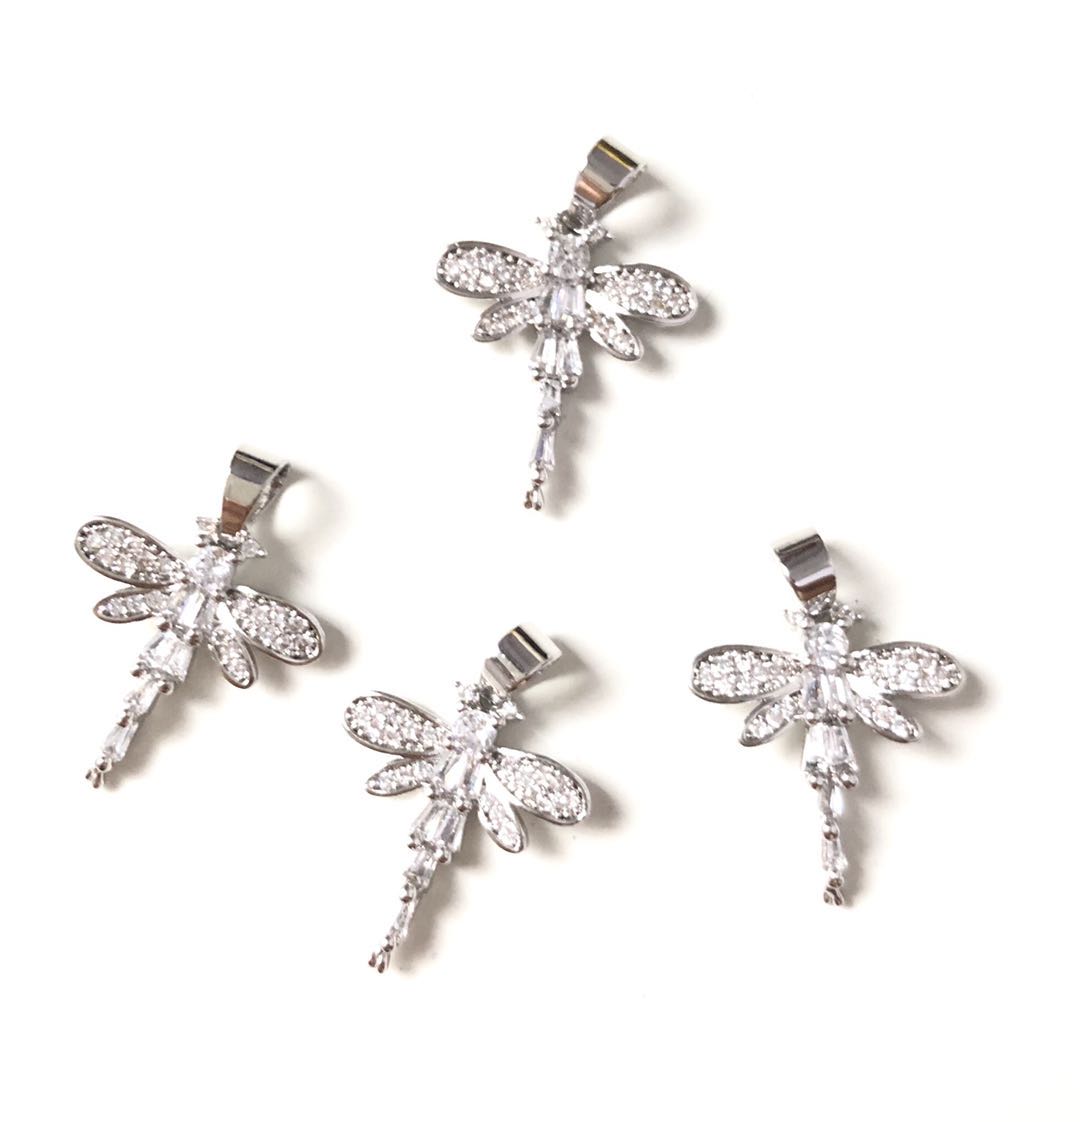 10pcs/lot 20*15.5mm CZ Paved Dragonfly Charms Silver CZ Paved Charms Animals & Insects Charms Beads Beyond